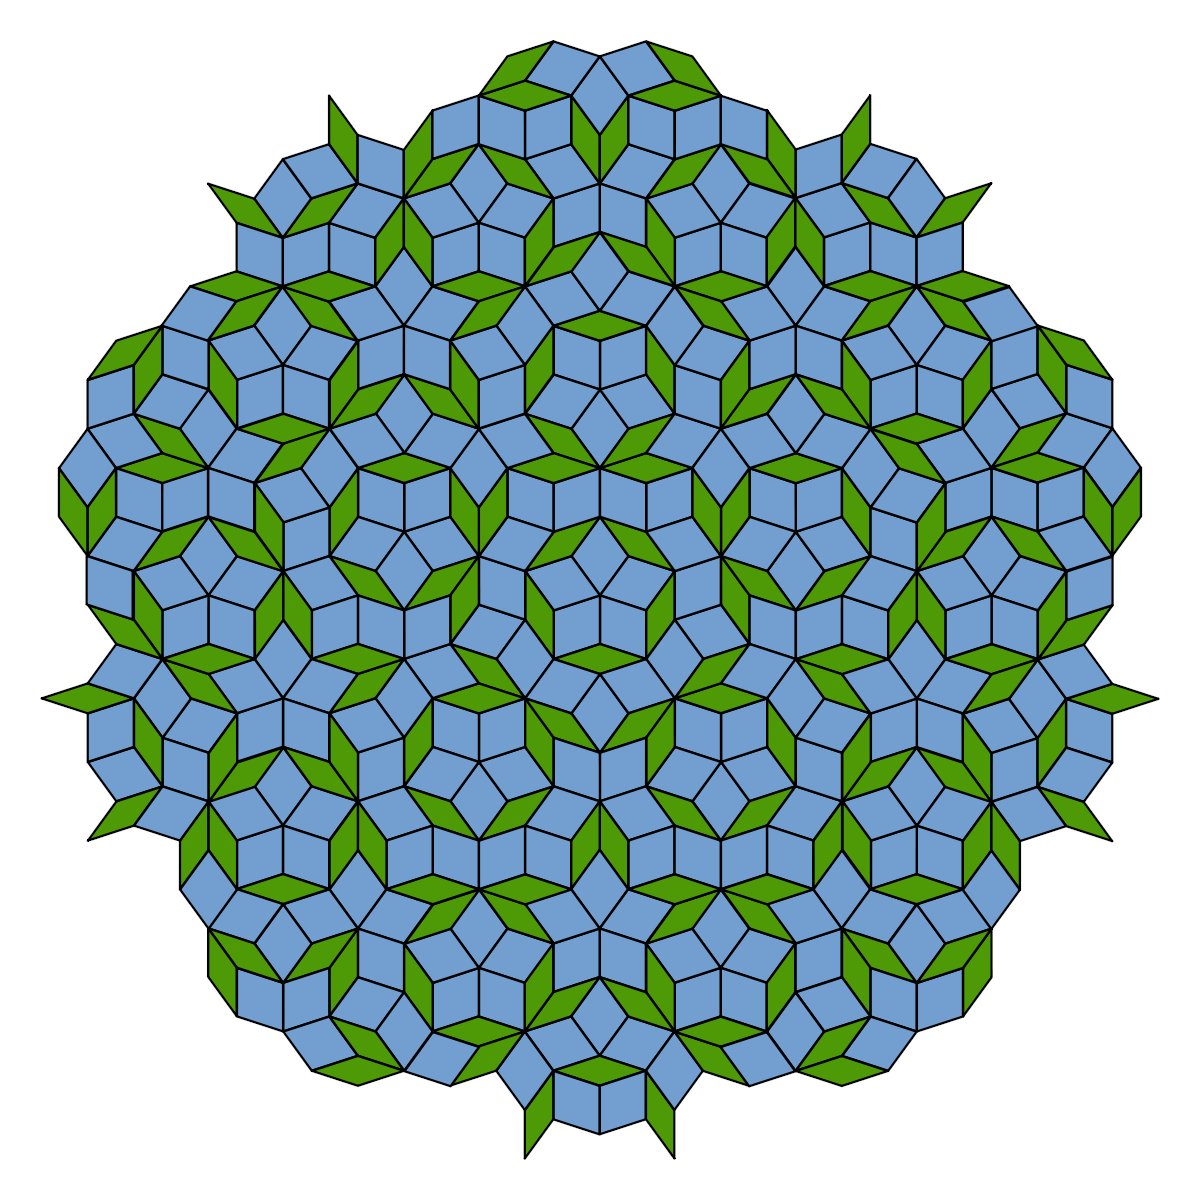 The Penrose pattern matched Kepler's original pattern on five-fold symmetry that he wasn't able to provemeaning that: the Penrose pattern was able to prove Kepler's original pattern using a different shape